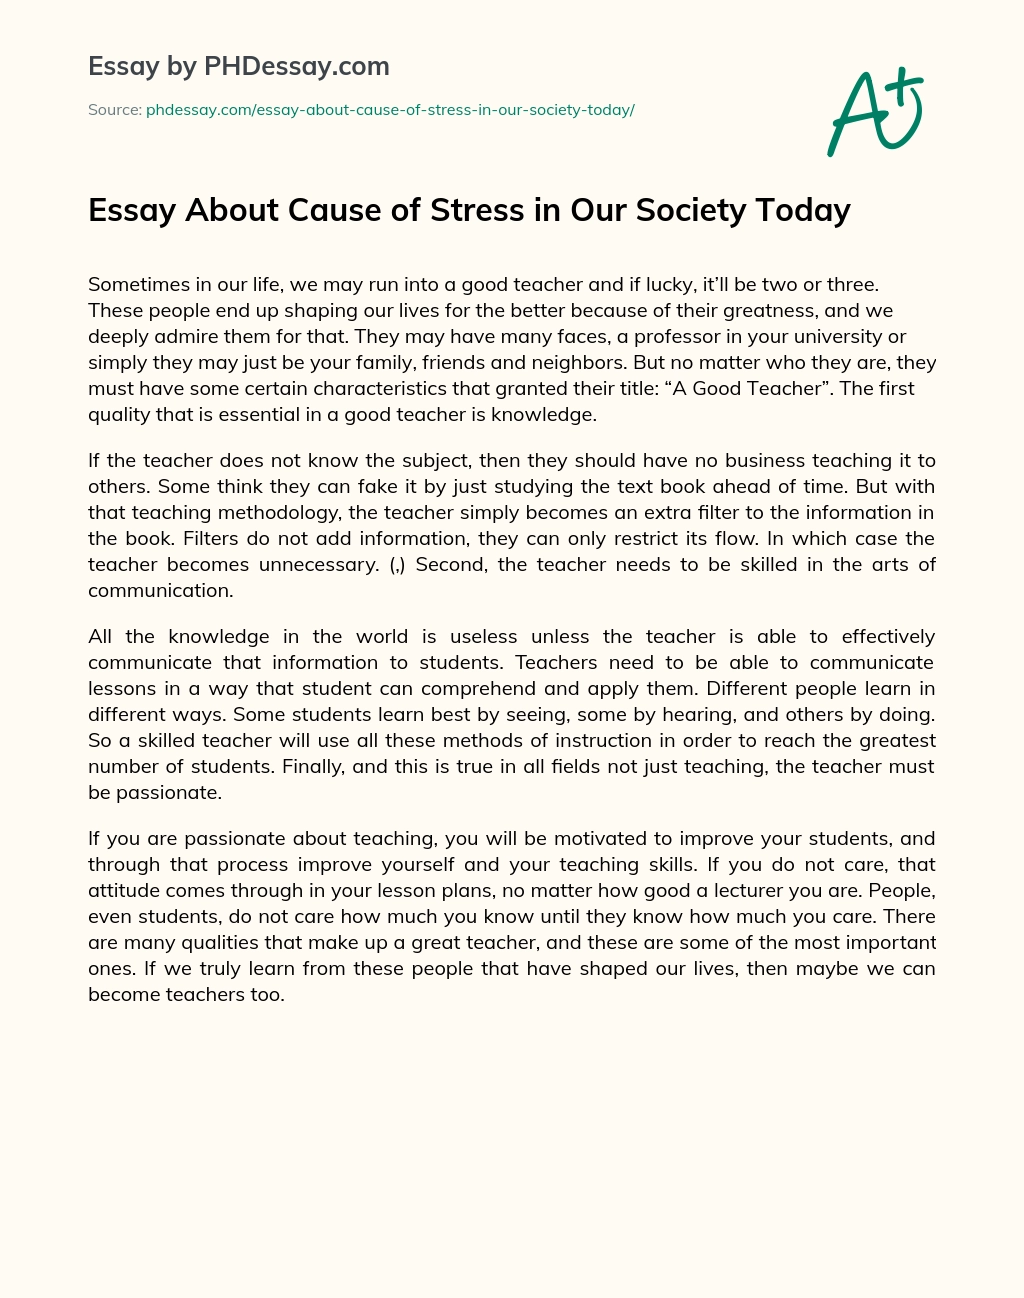 Essay About Cause of Stress in Our Society Today essay